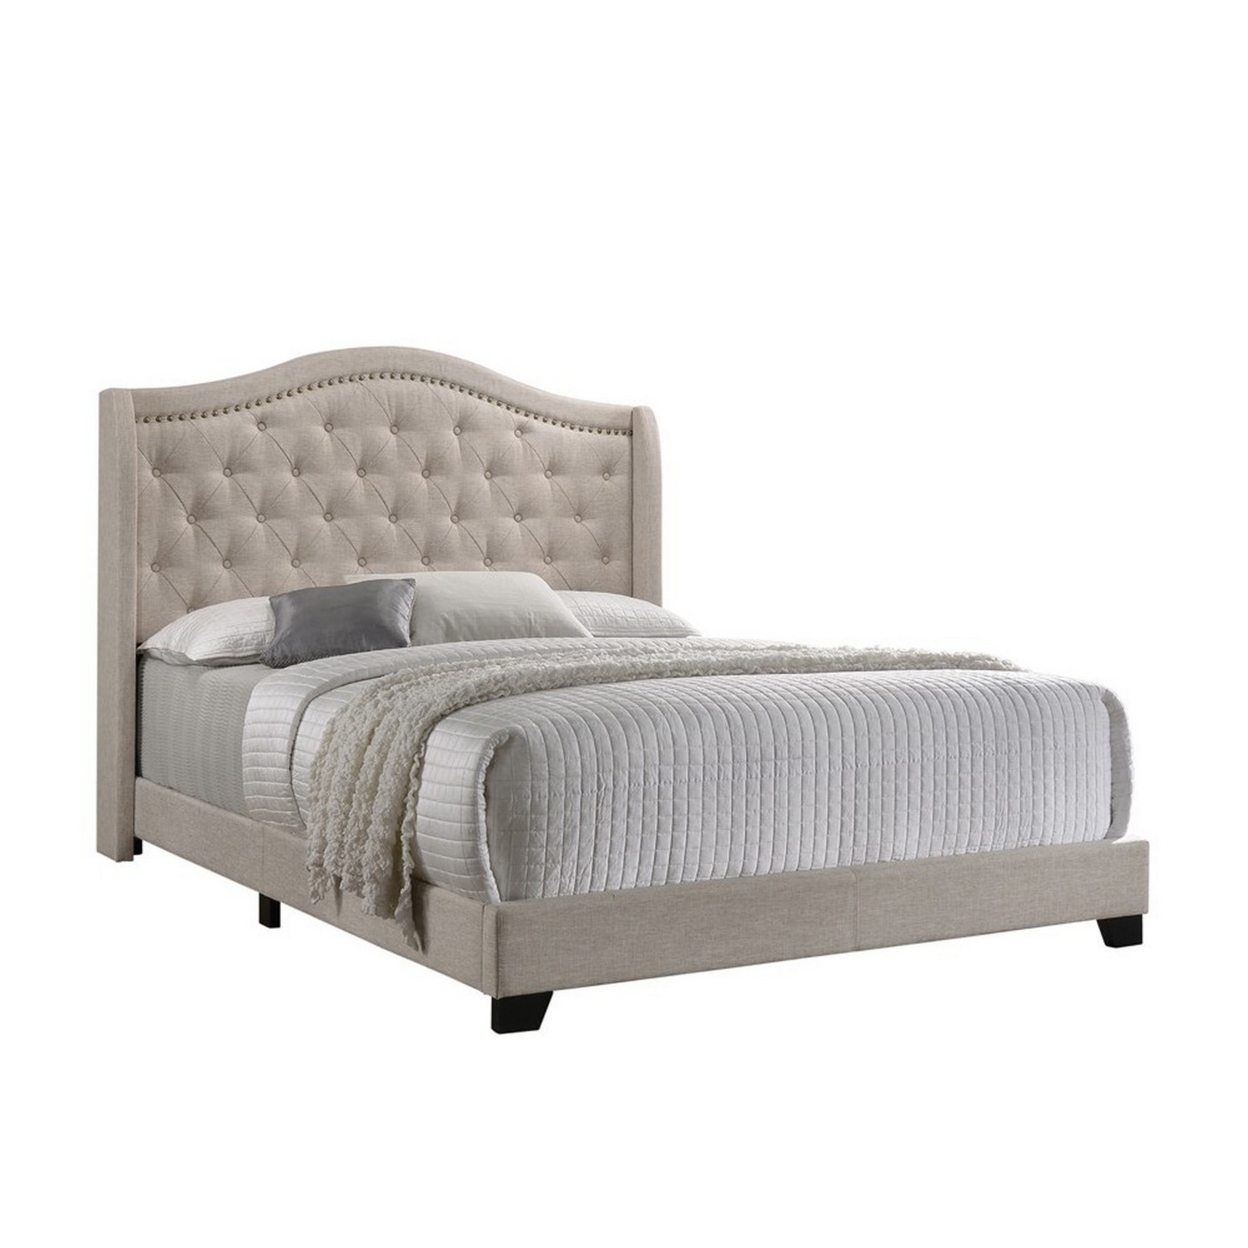 Fabric Upholstered Wooden Demi Wing Full Bed With Camelback Headboard,Beige- Saltoro Sherpi